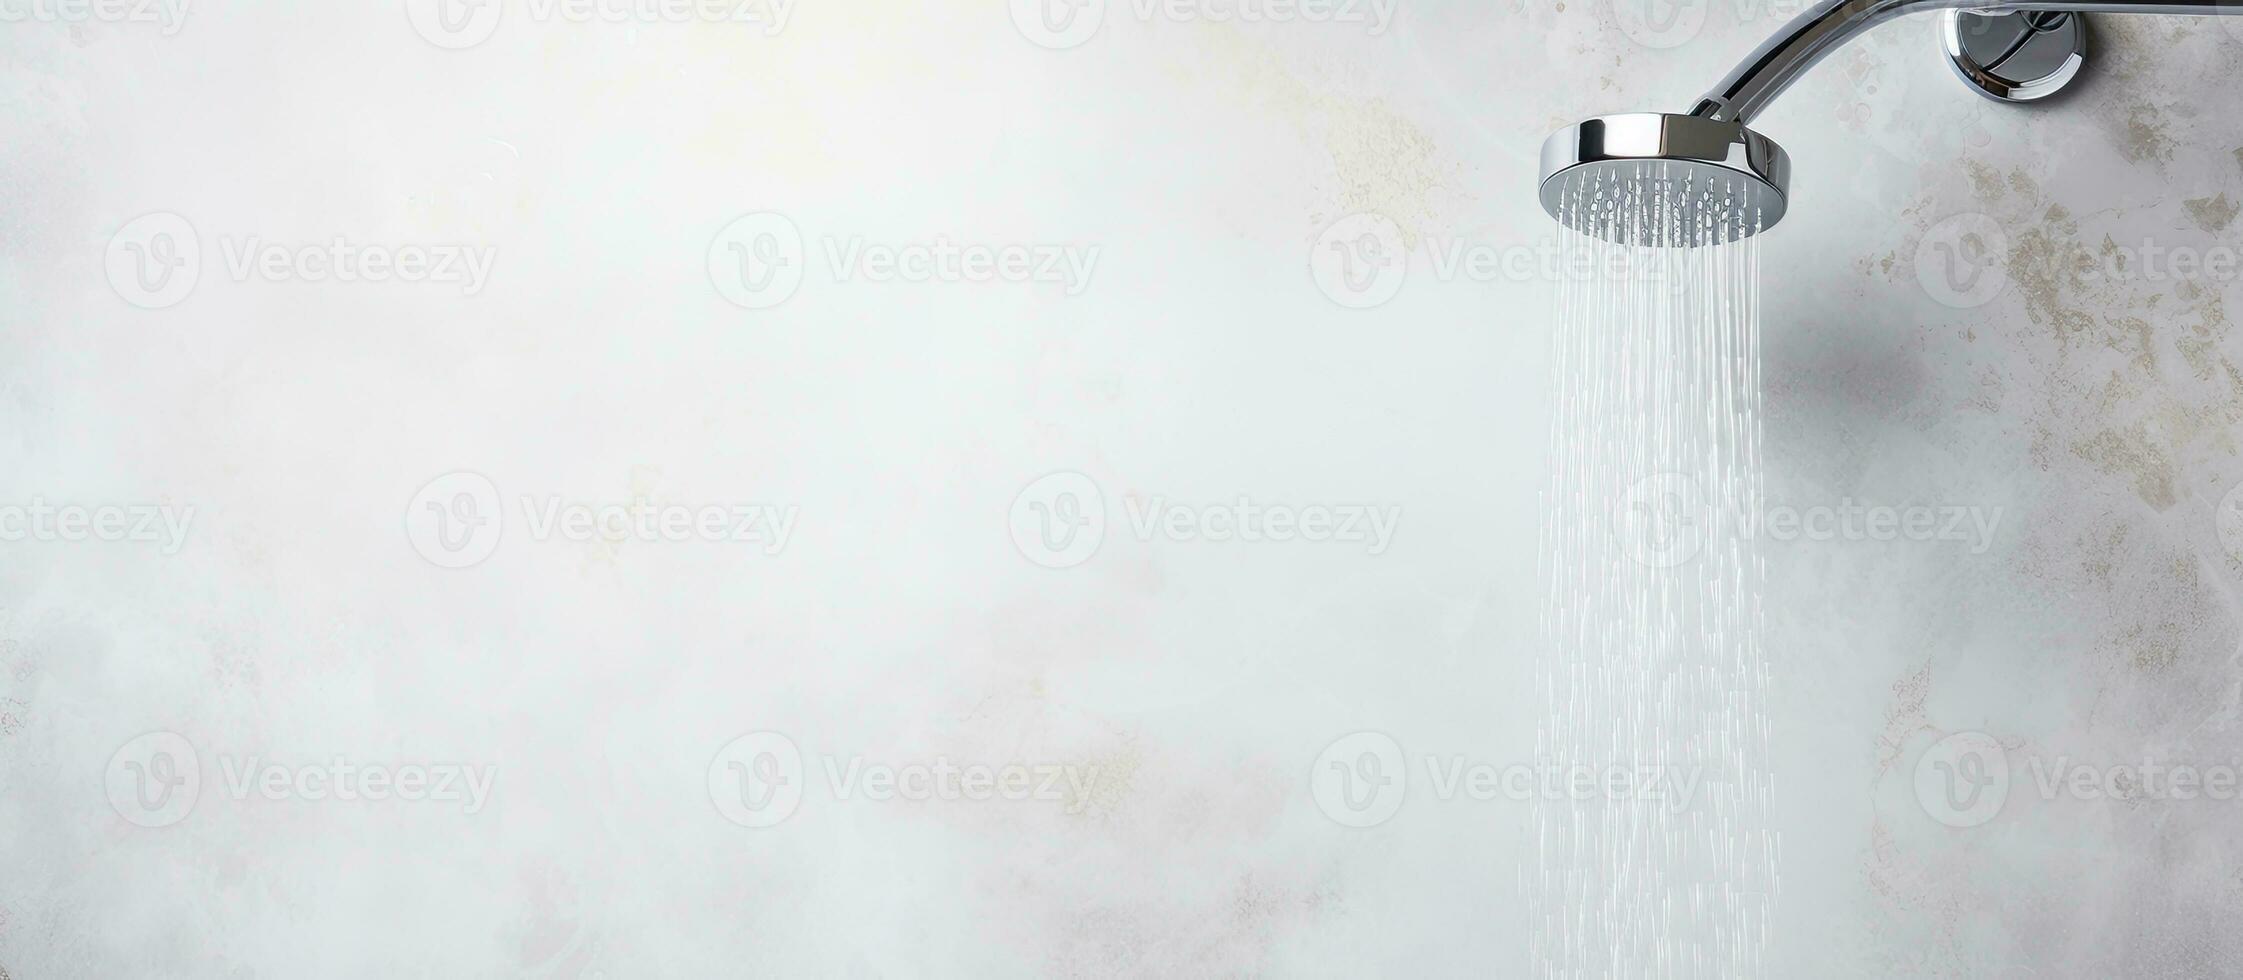 Photo of a shower head with water flowing out in a close up shot with copy space